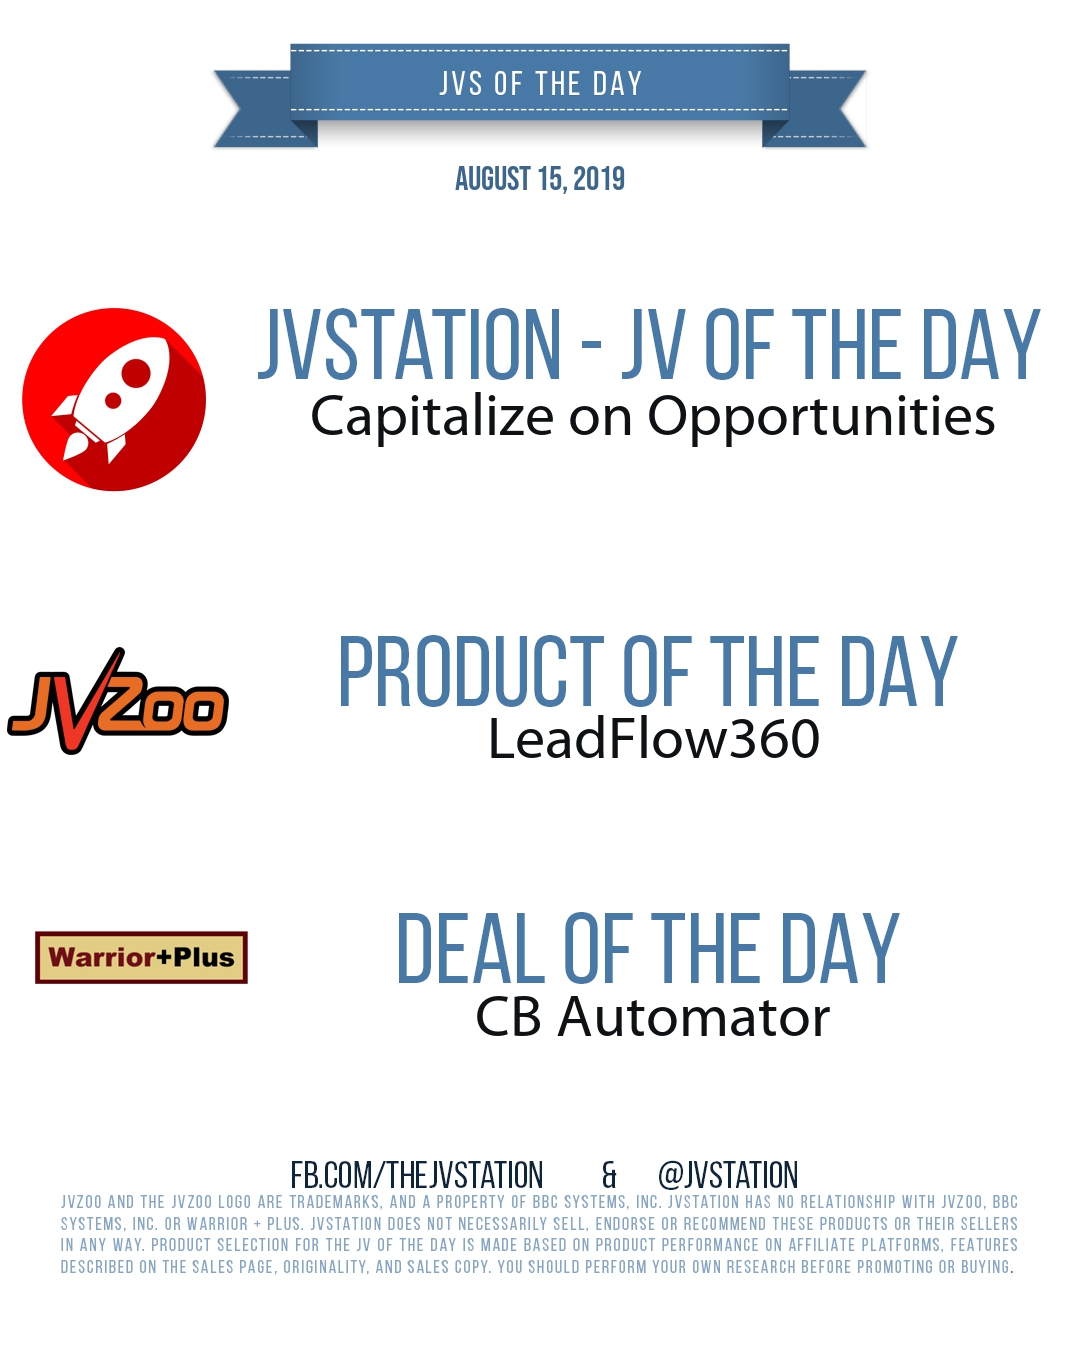 JVs of the day - August 15, 2019